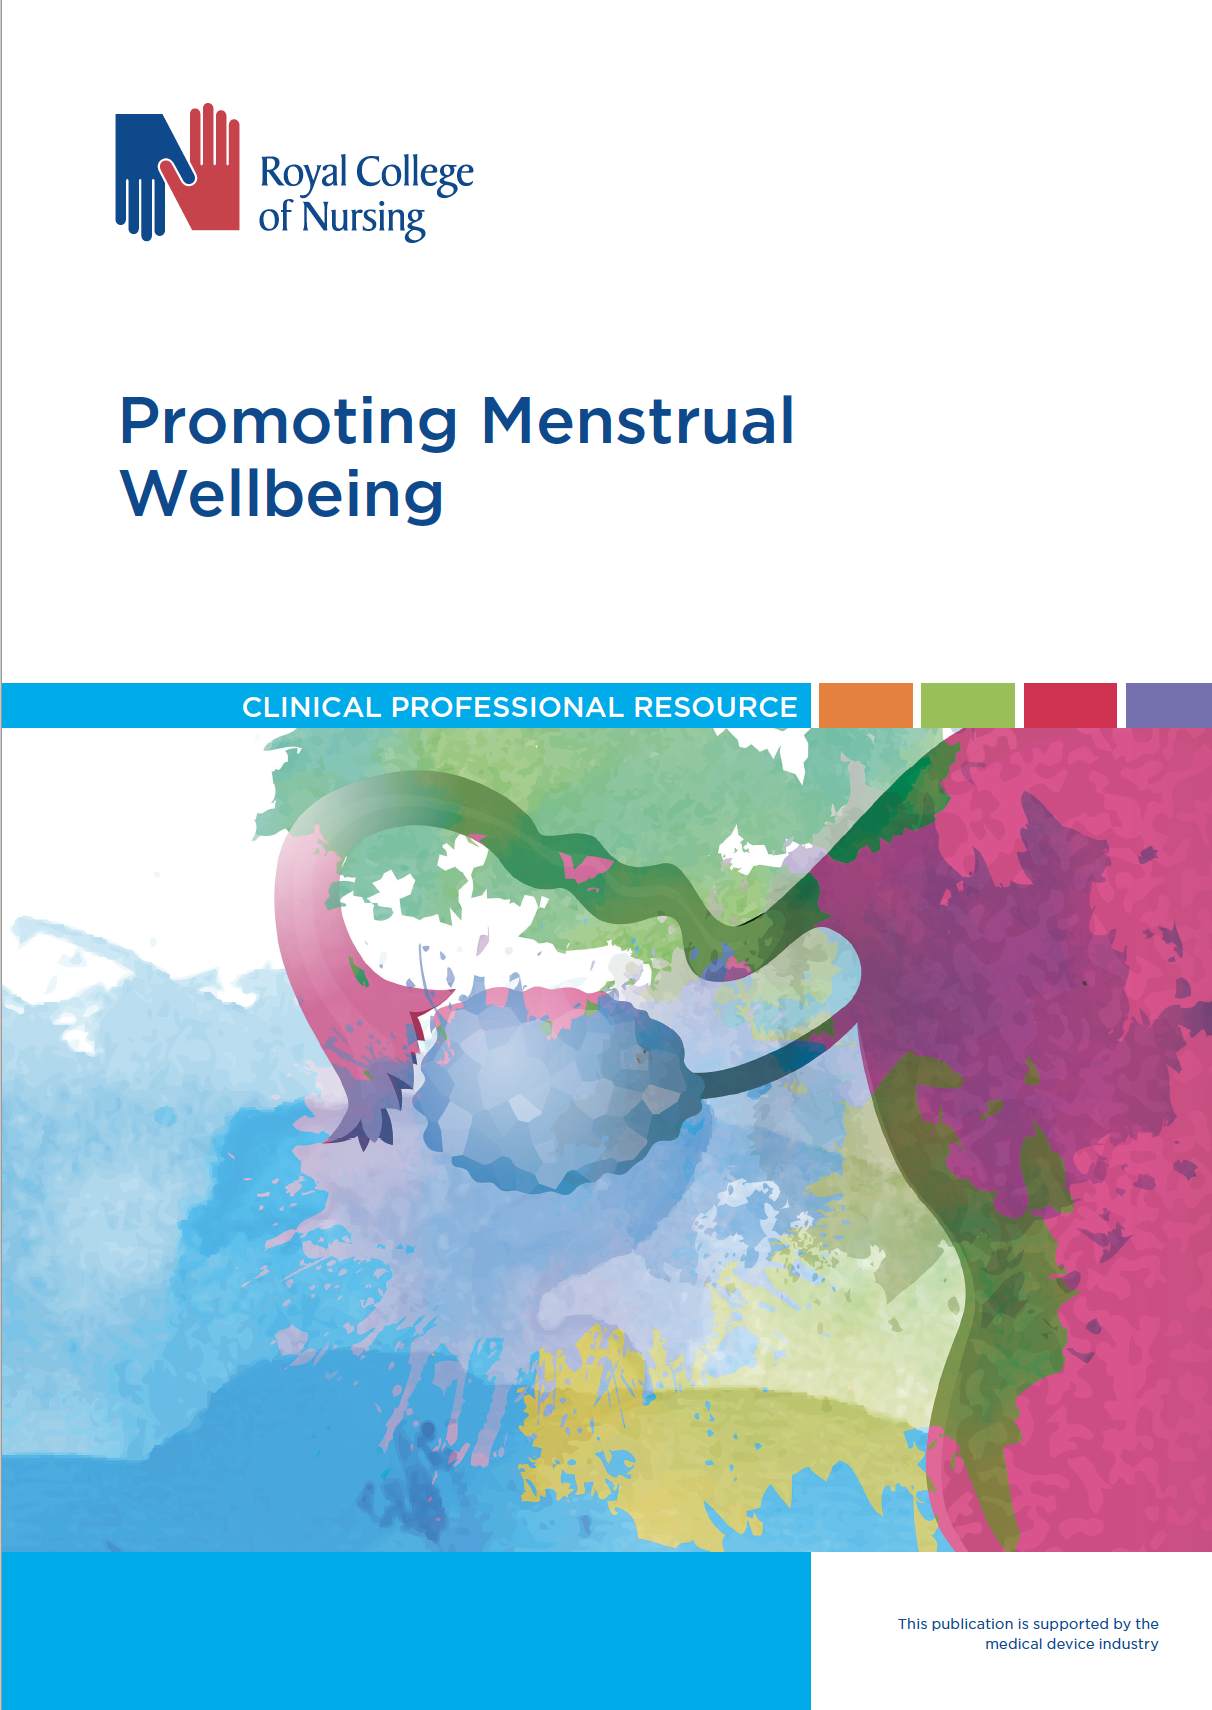 Text: promoting menstrual wellbeing